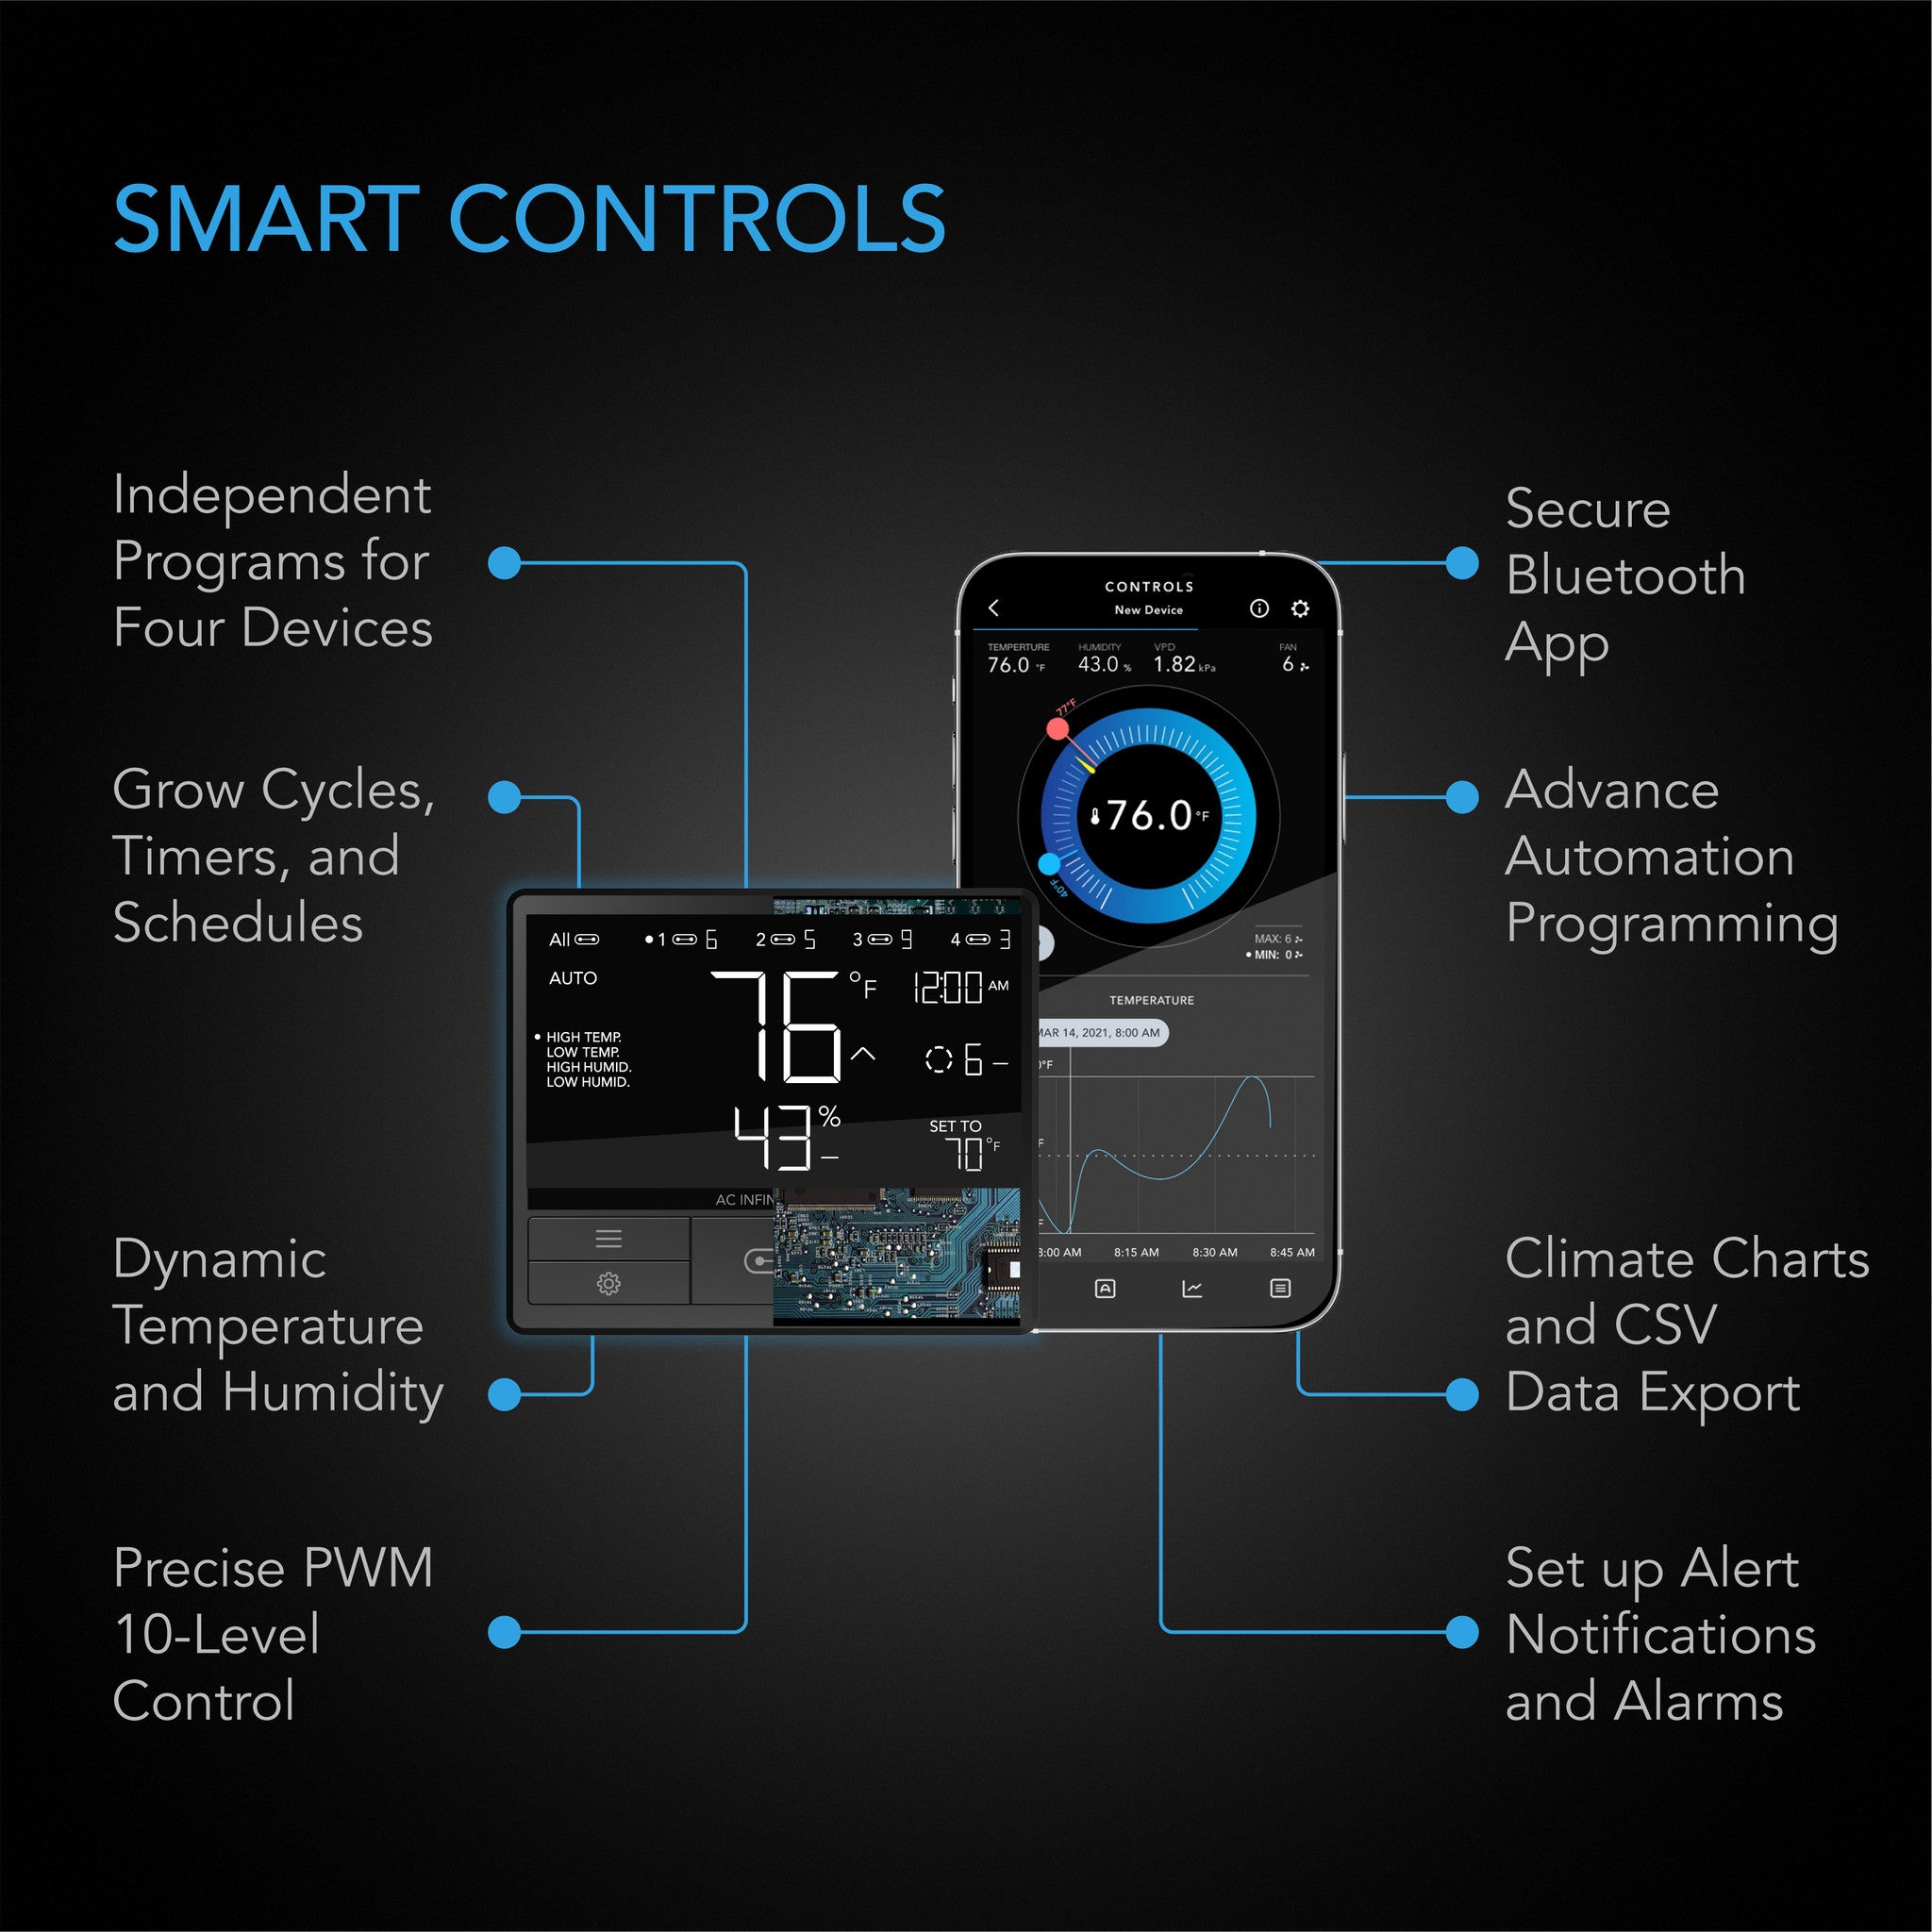 CONTROLLER 69, Independent Programs for Four Devices, Dynamic Temperature,  Humidity, Scheduling, Cycles, Levels Control, Data App, Bluetooth